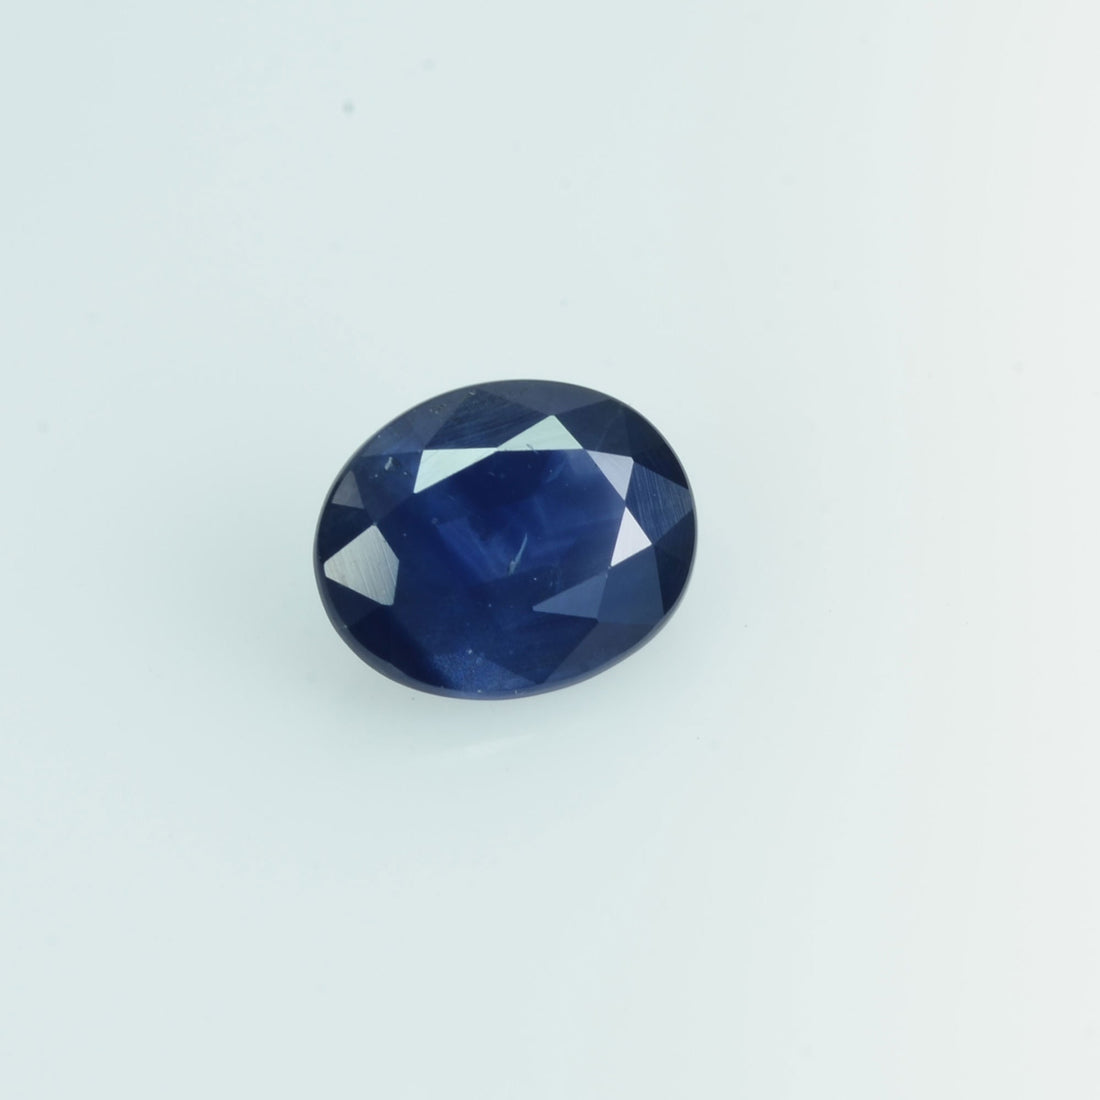 0.75 cts Natural Blue Sapphire Loose Gemstone Oval Cut